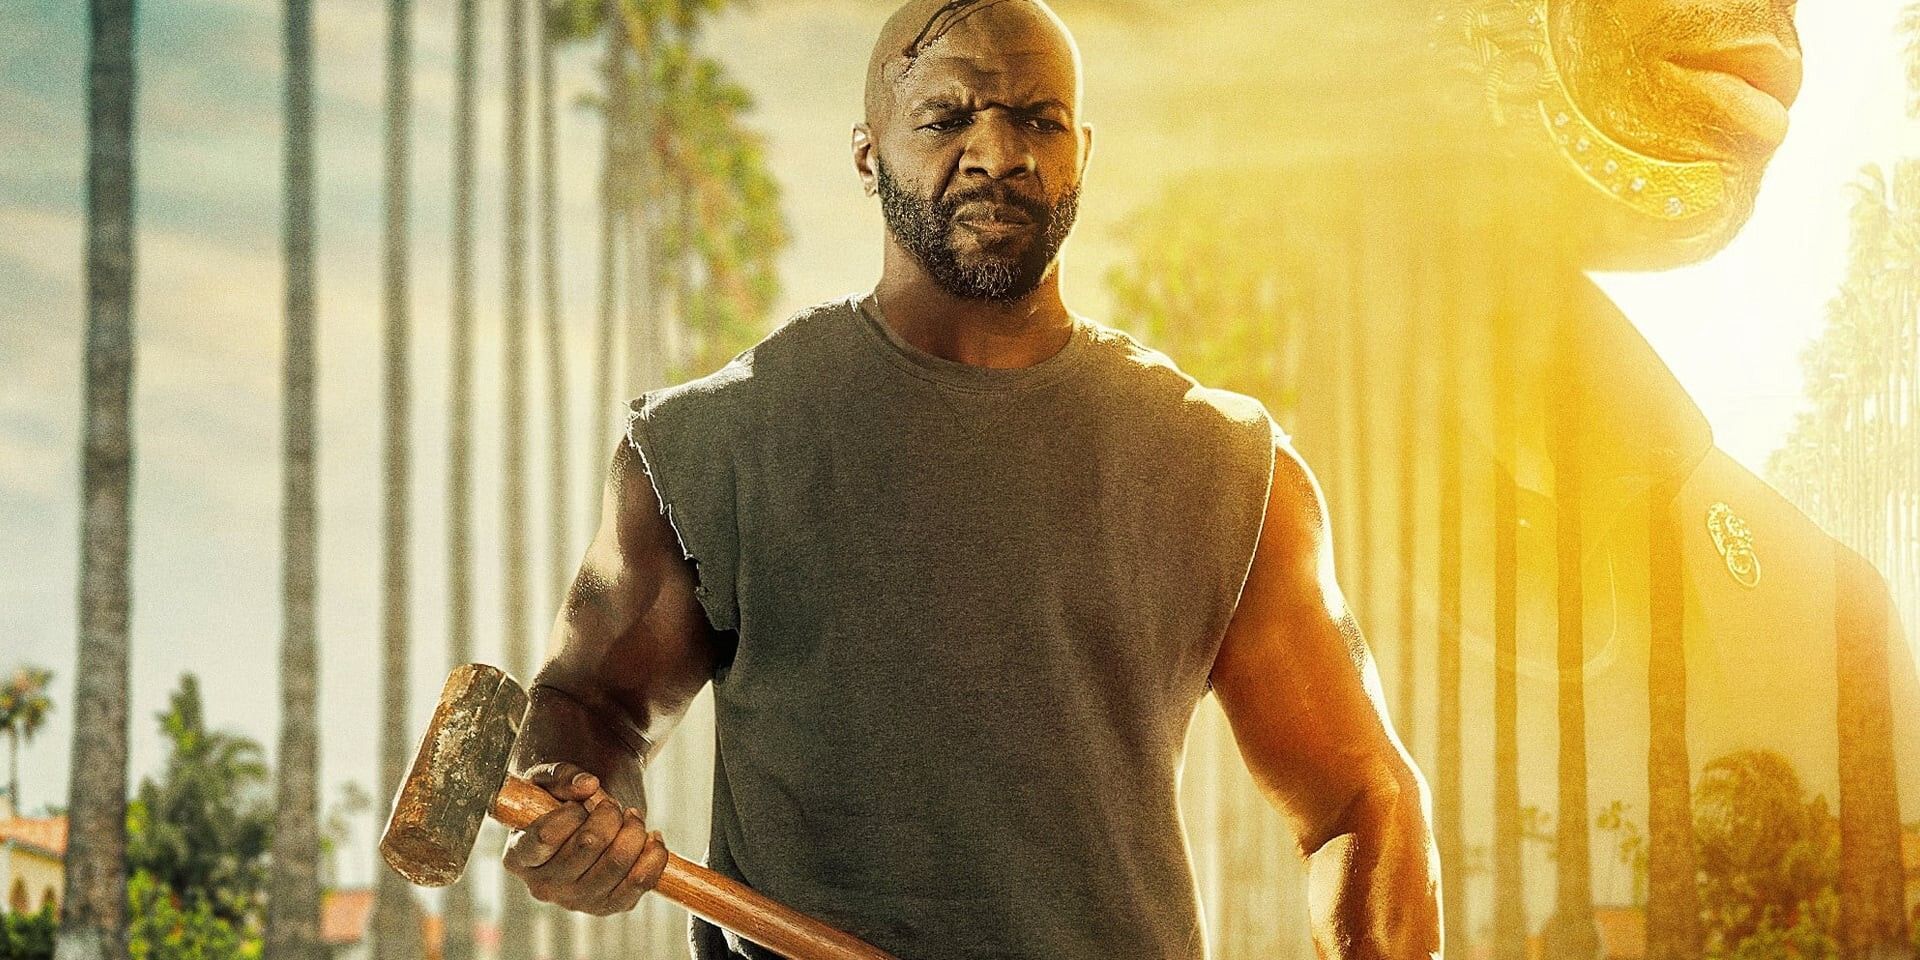 A promotional still for the film 'John Henry' featuring Terry Crews as the titular John Henry holding a sledgehammer